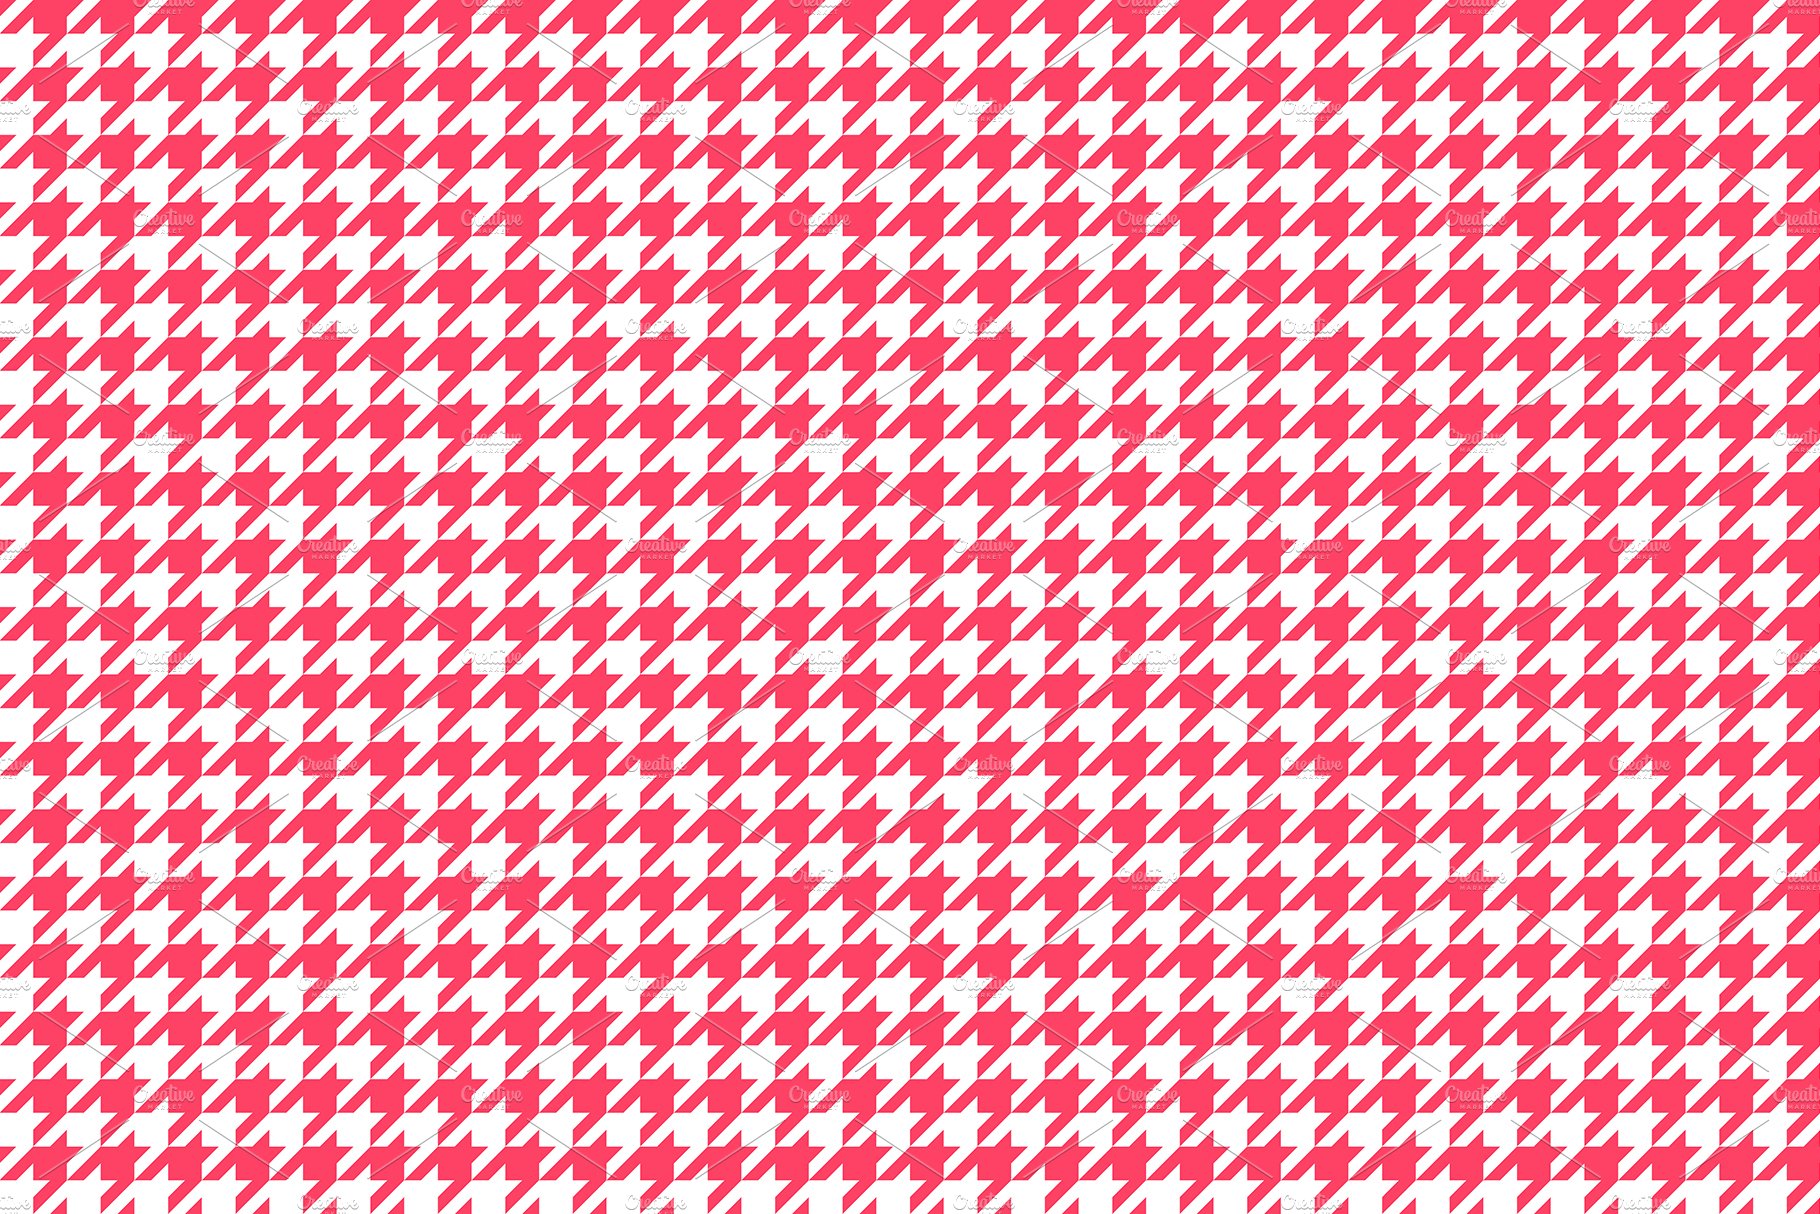 Houndstooth Pattern Photos and Images